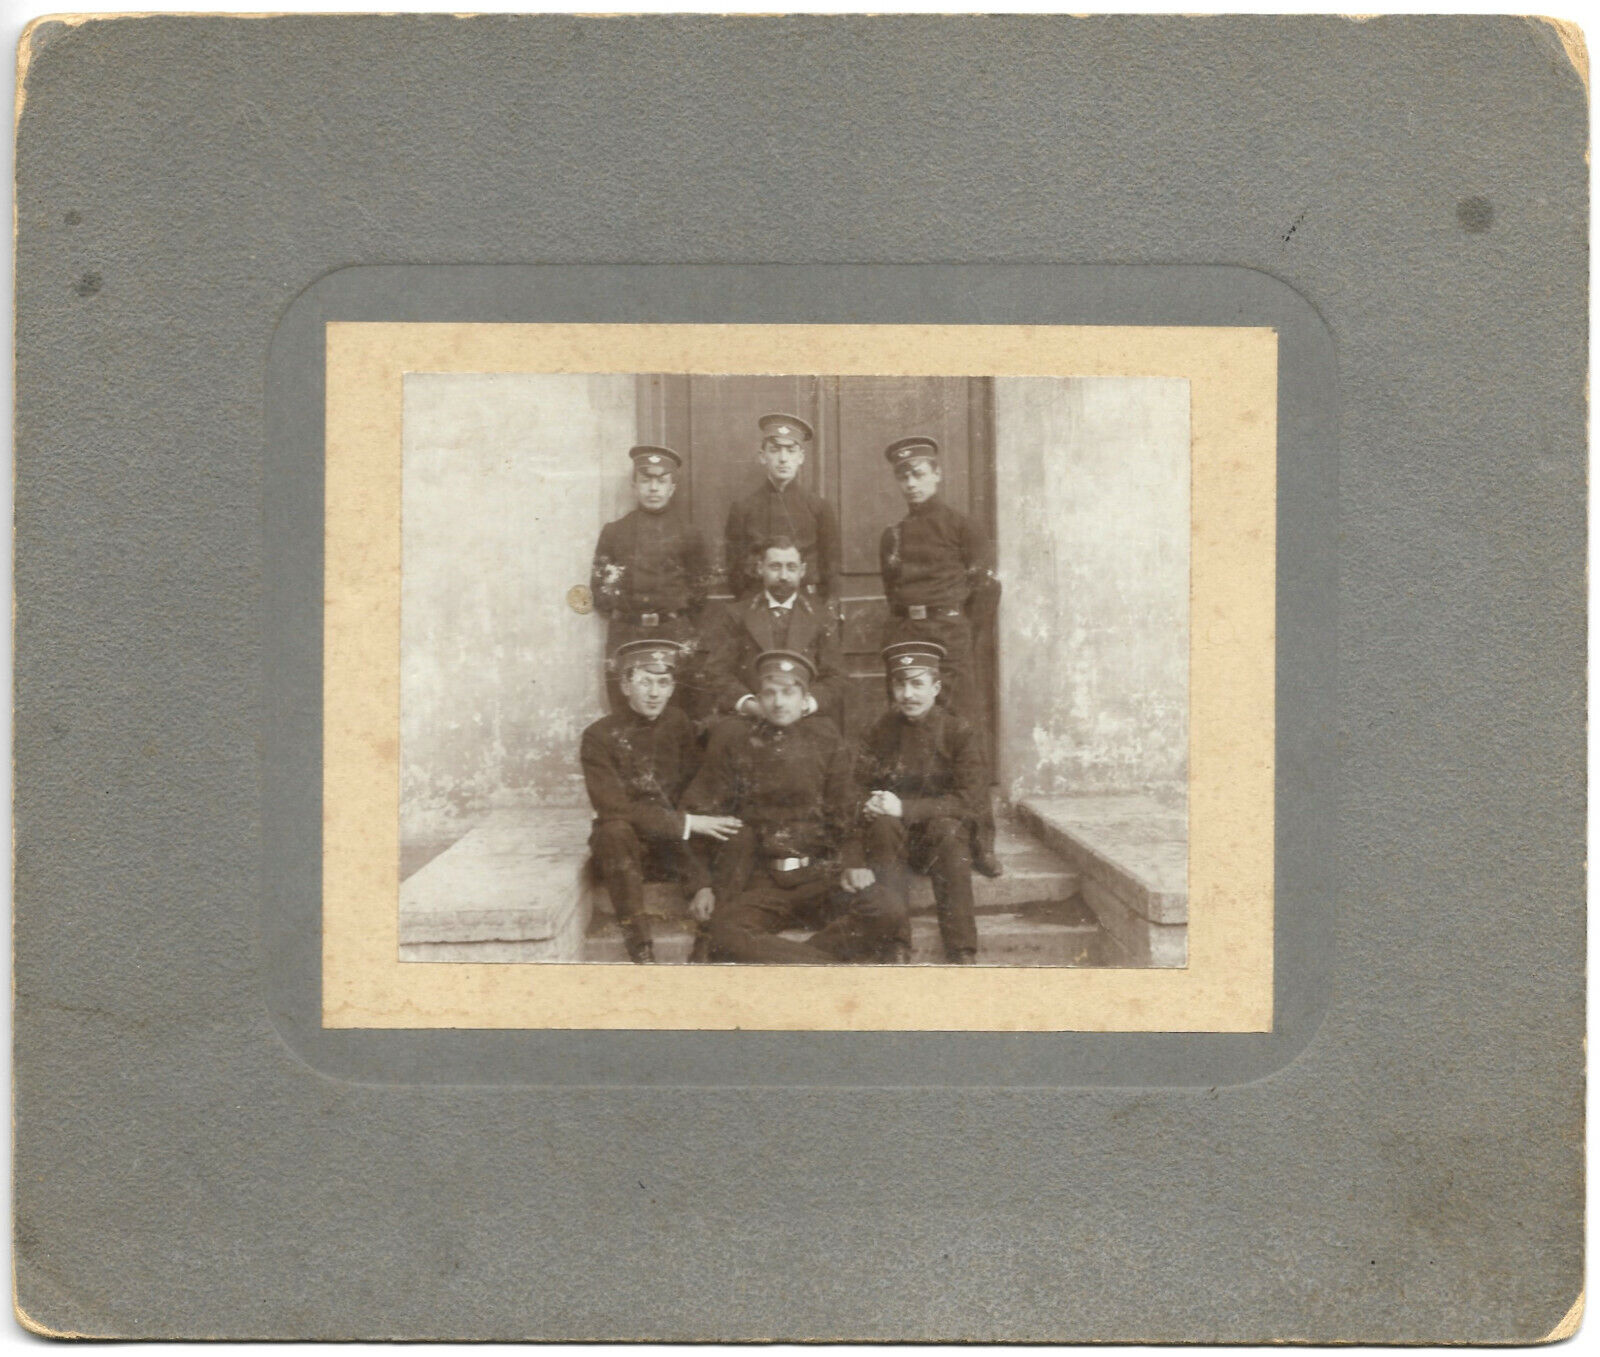 RUSSIA MILITARY PHOTO - RUSSIAN MILITARY SCHOOL SOLDIERS TOP 1900 PHOTO